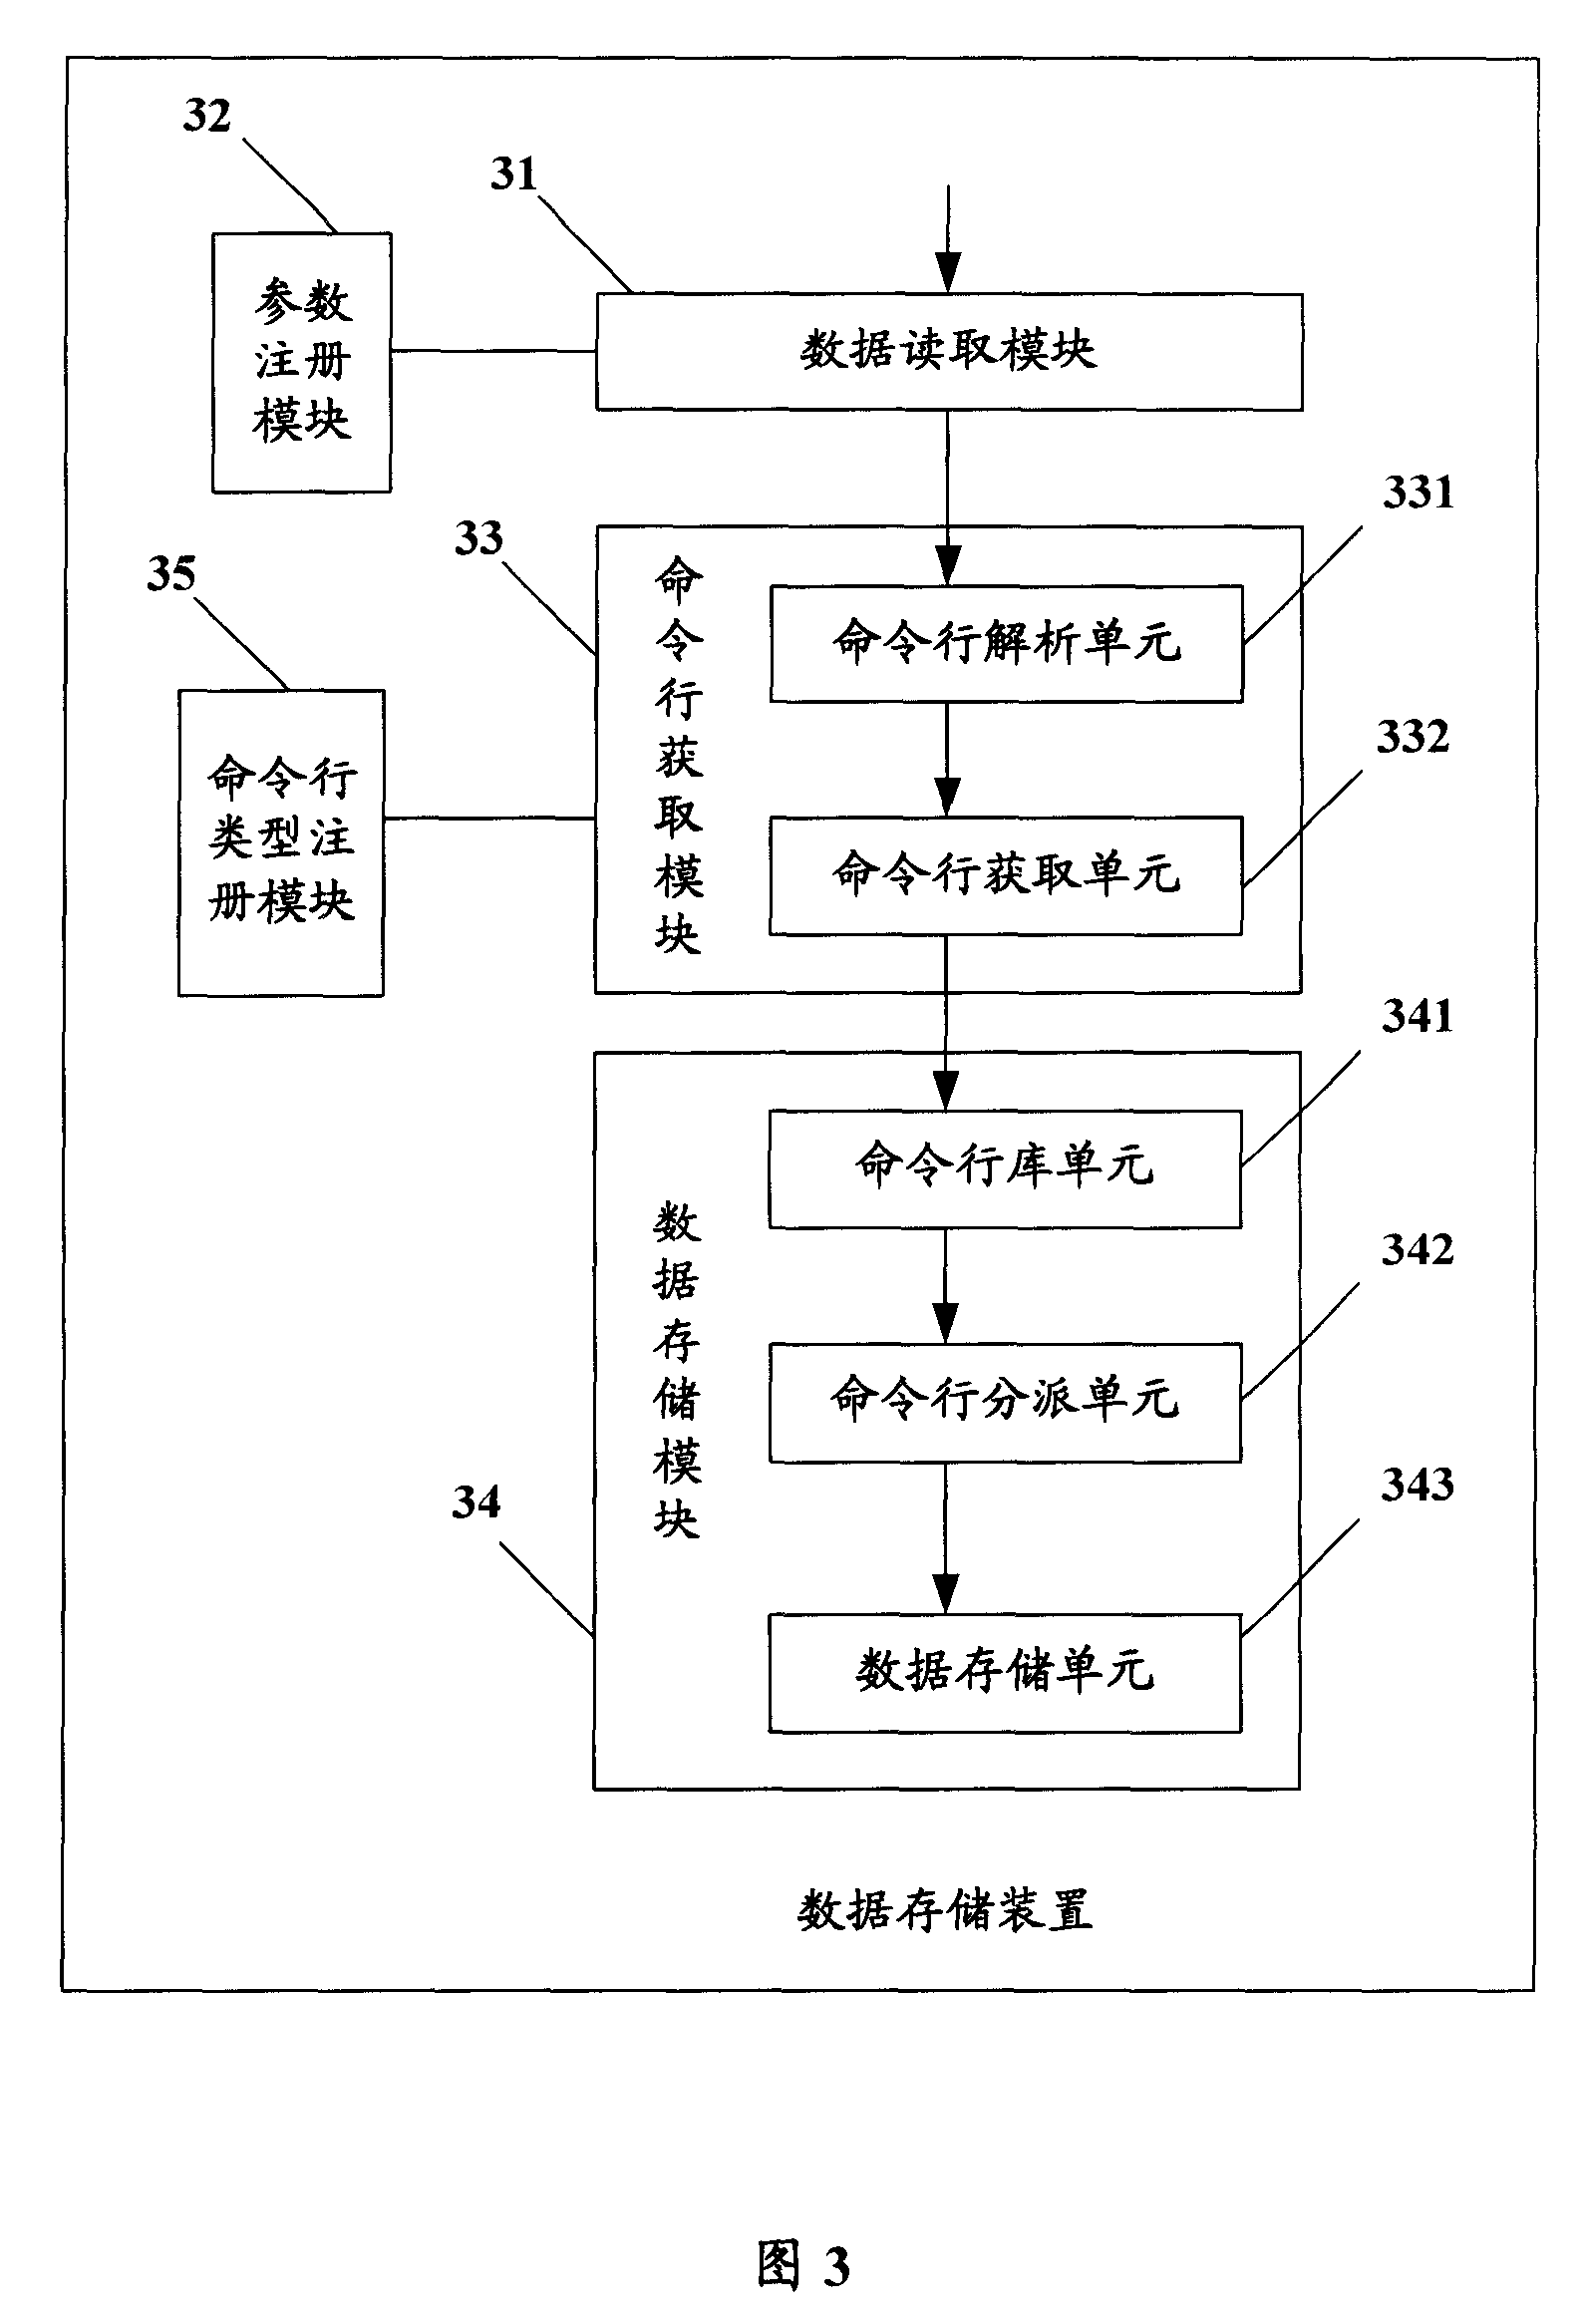 Data storage method and device in mobile communication system